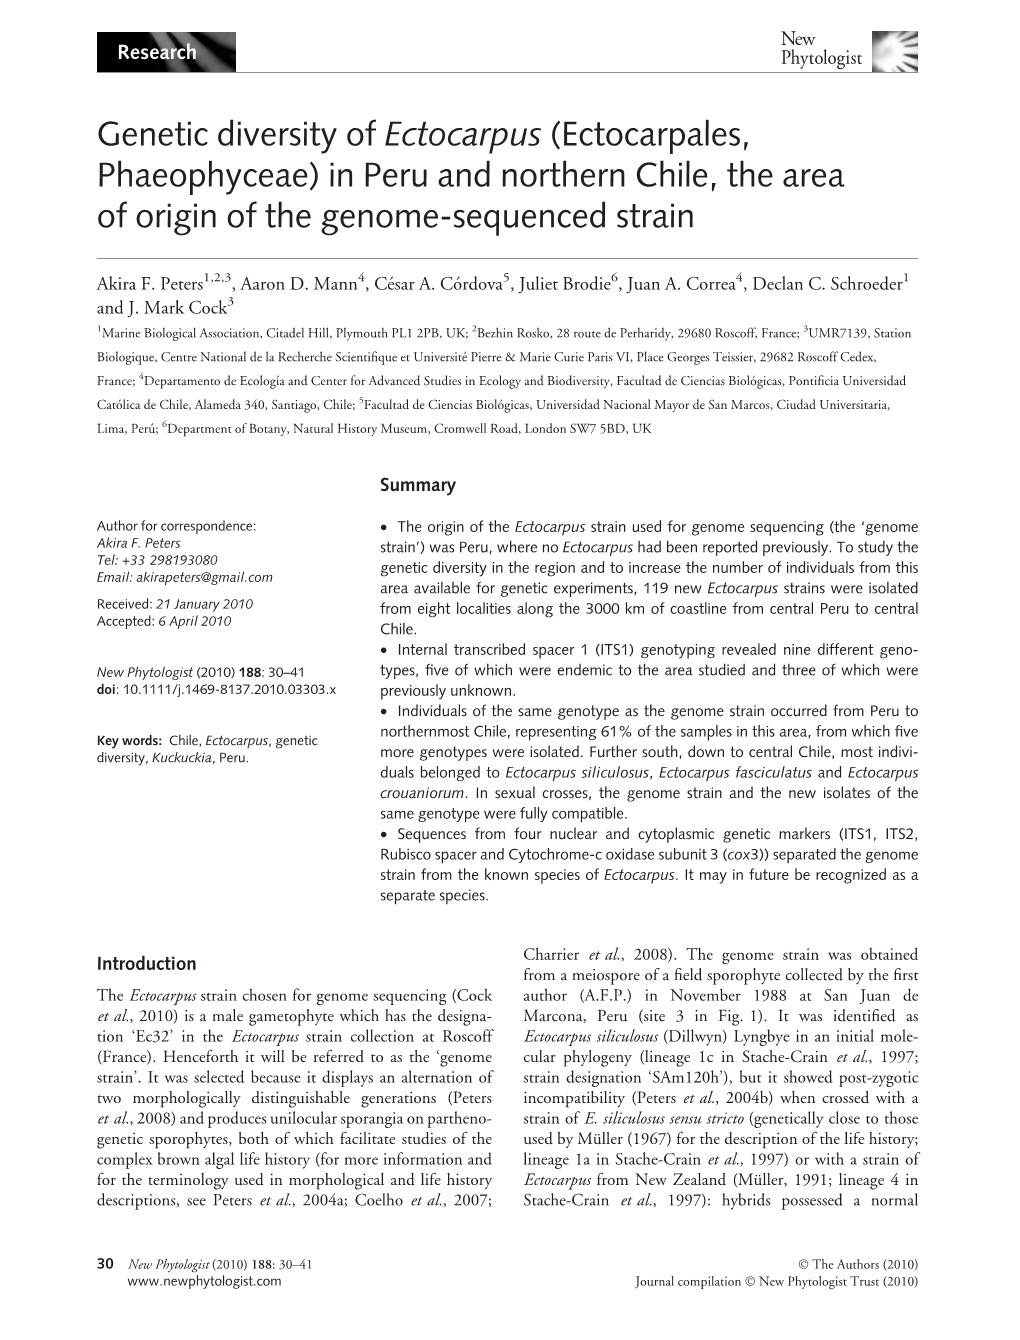 Genetic Diversity of Ectocarpus (Ectocarpales, Phaeophyceae) in Peru and Northern Chile, the Area of Origin of the Genome-Sequenced Strain